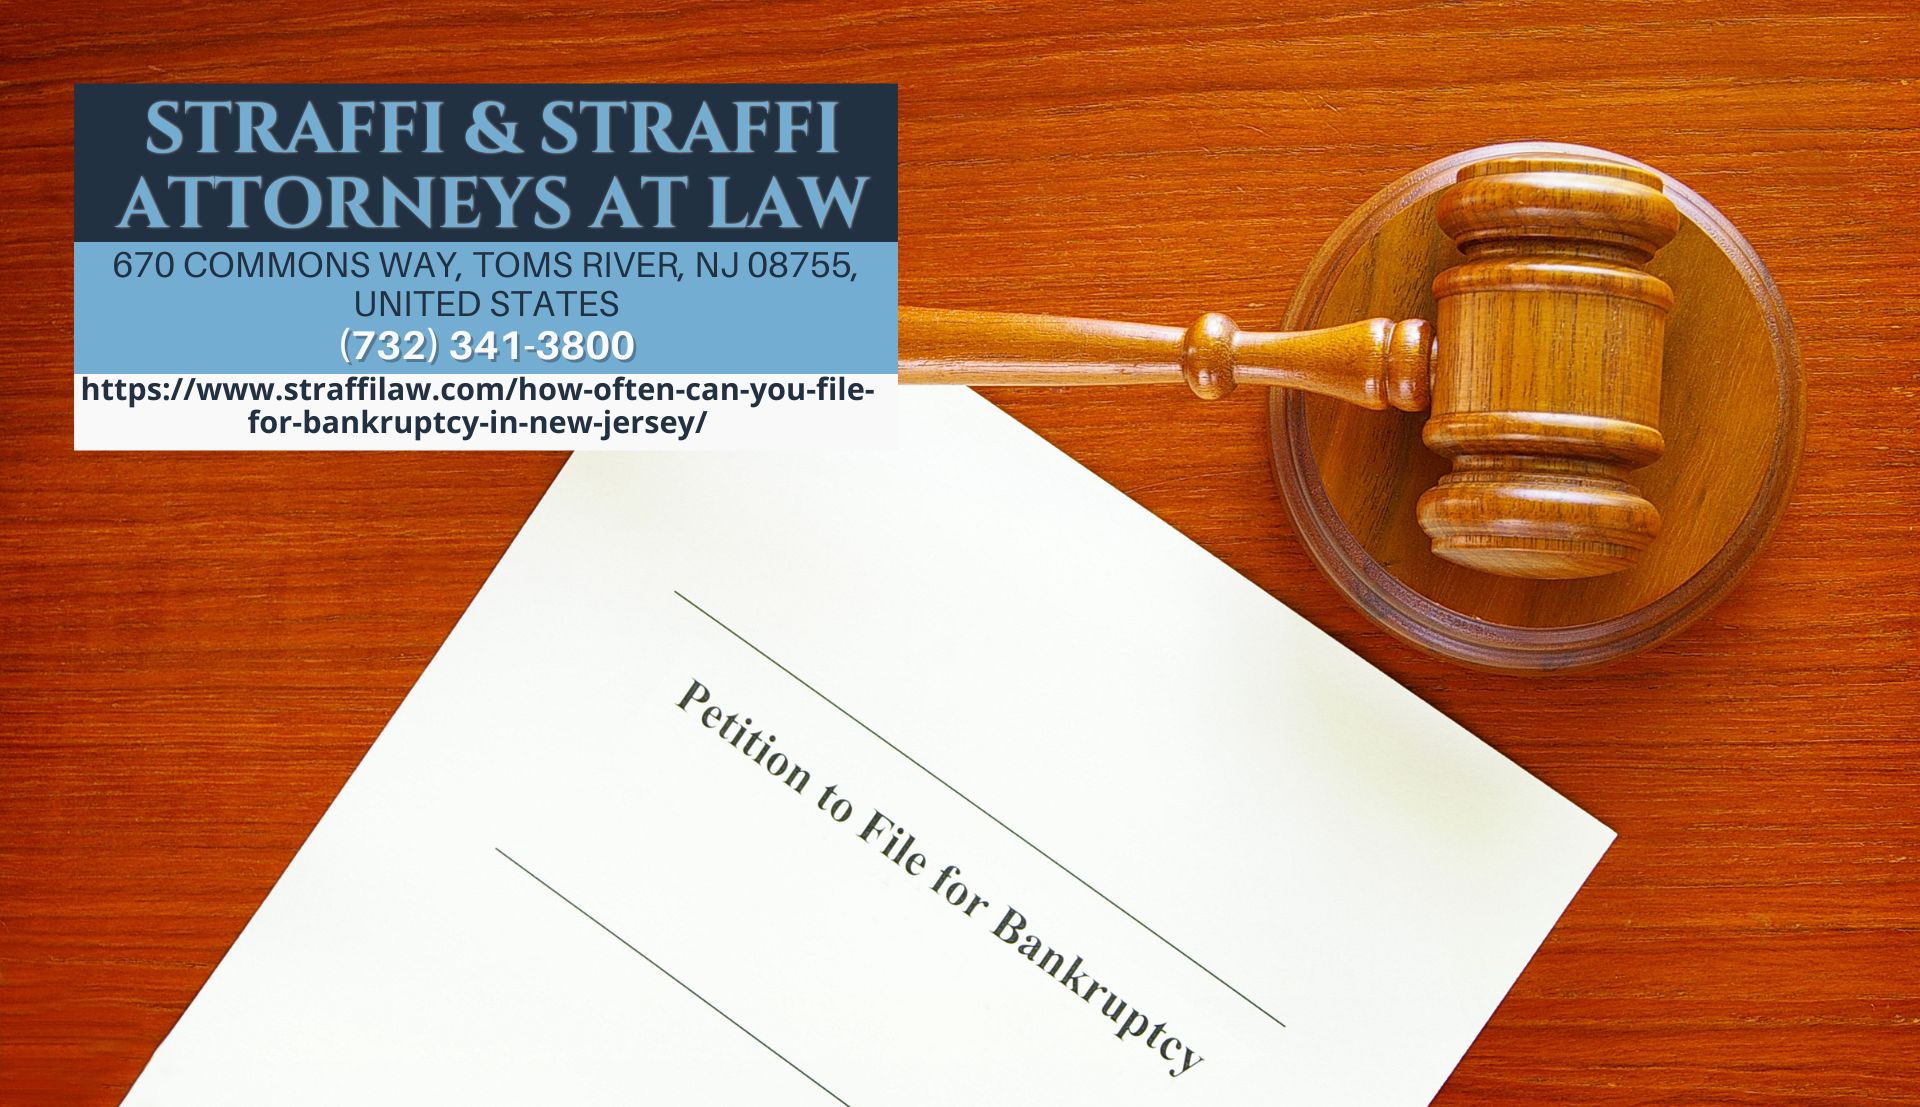 New Jersey Bankruptcy Attorney Daniel Straffi Releases Insightful Article on Bankruptcy Filing Frequency